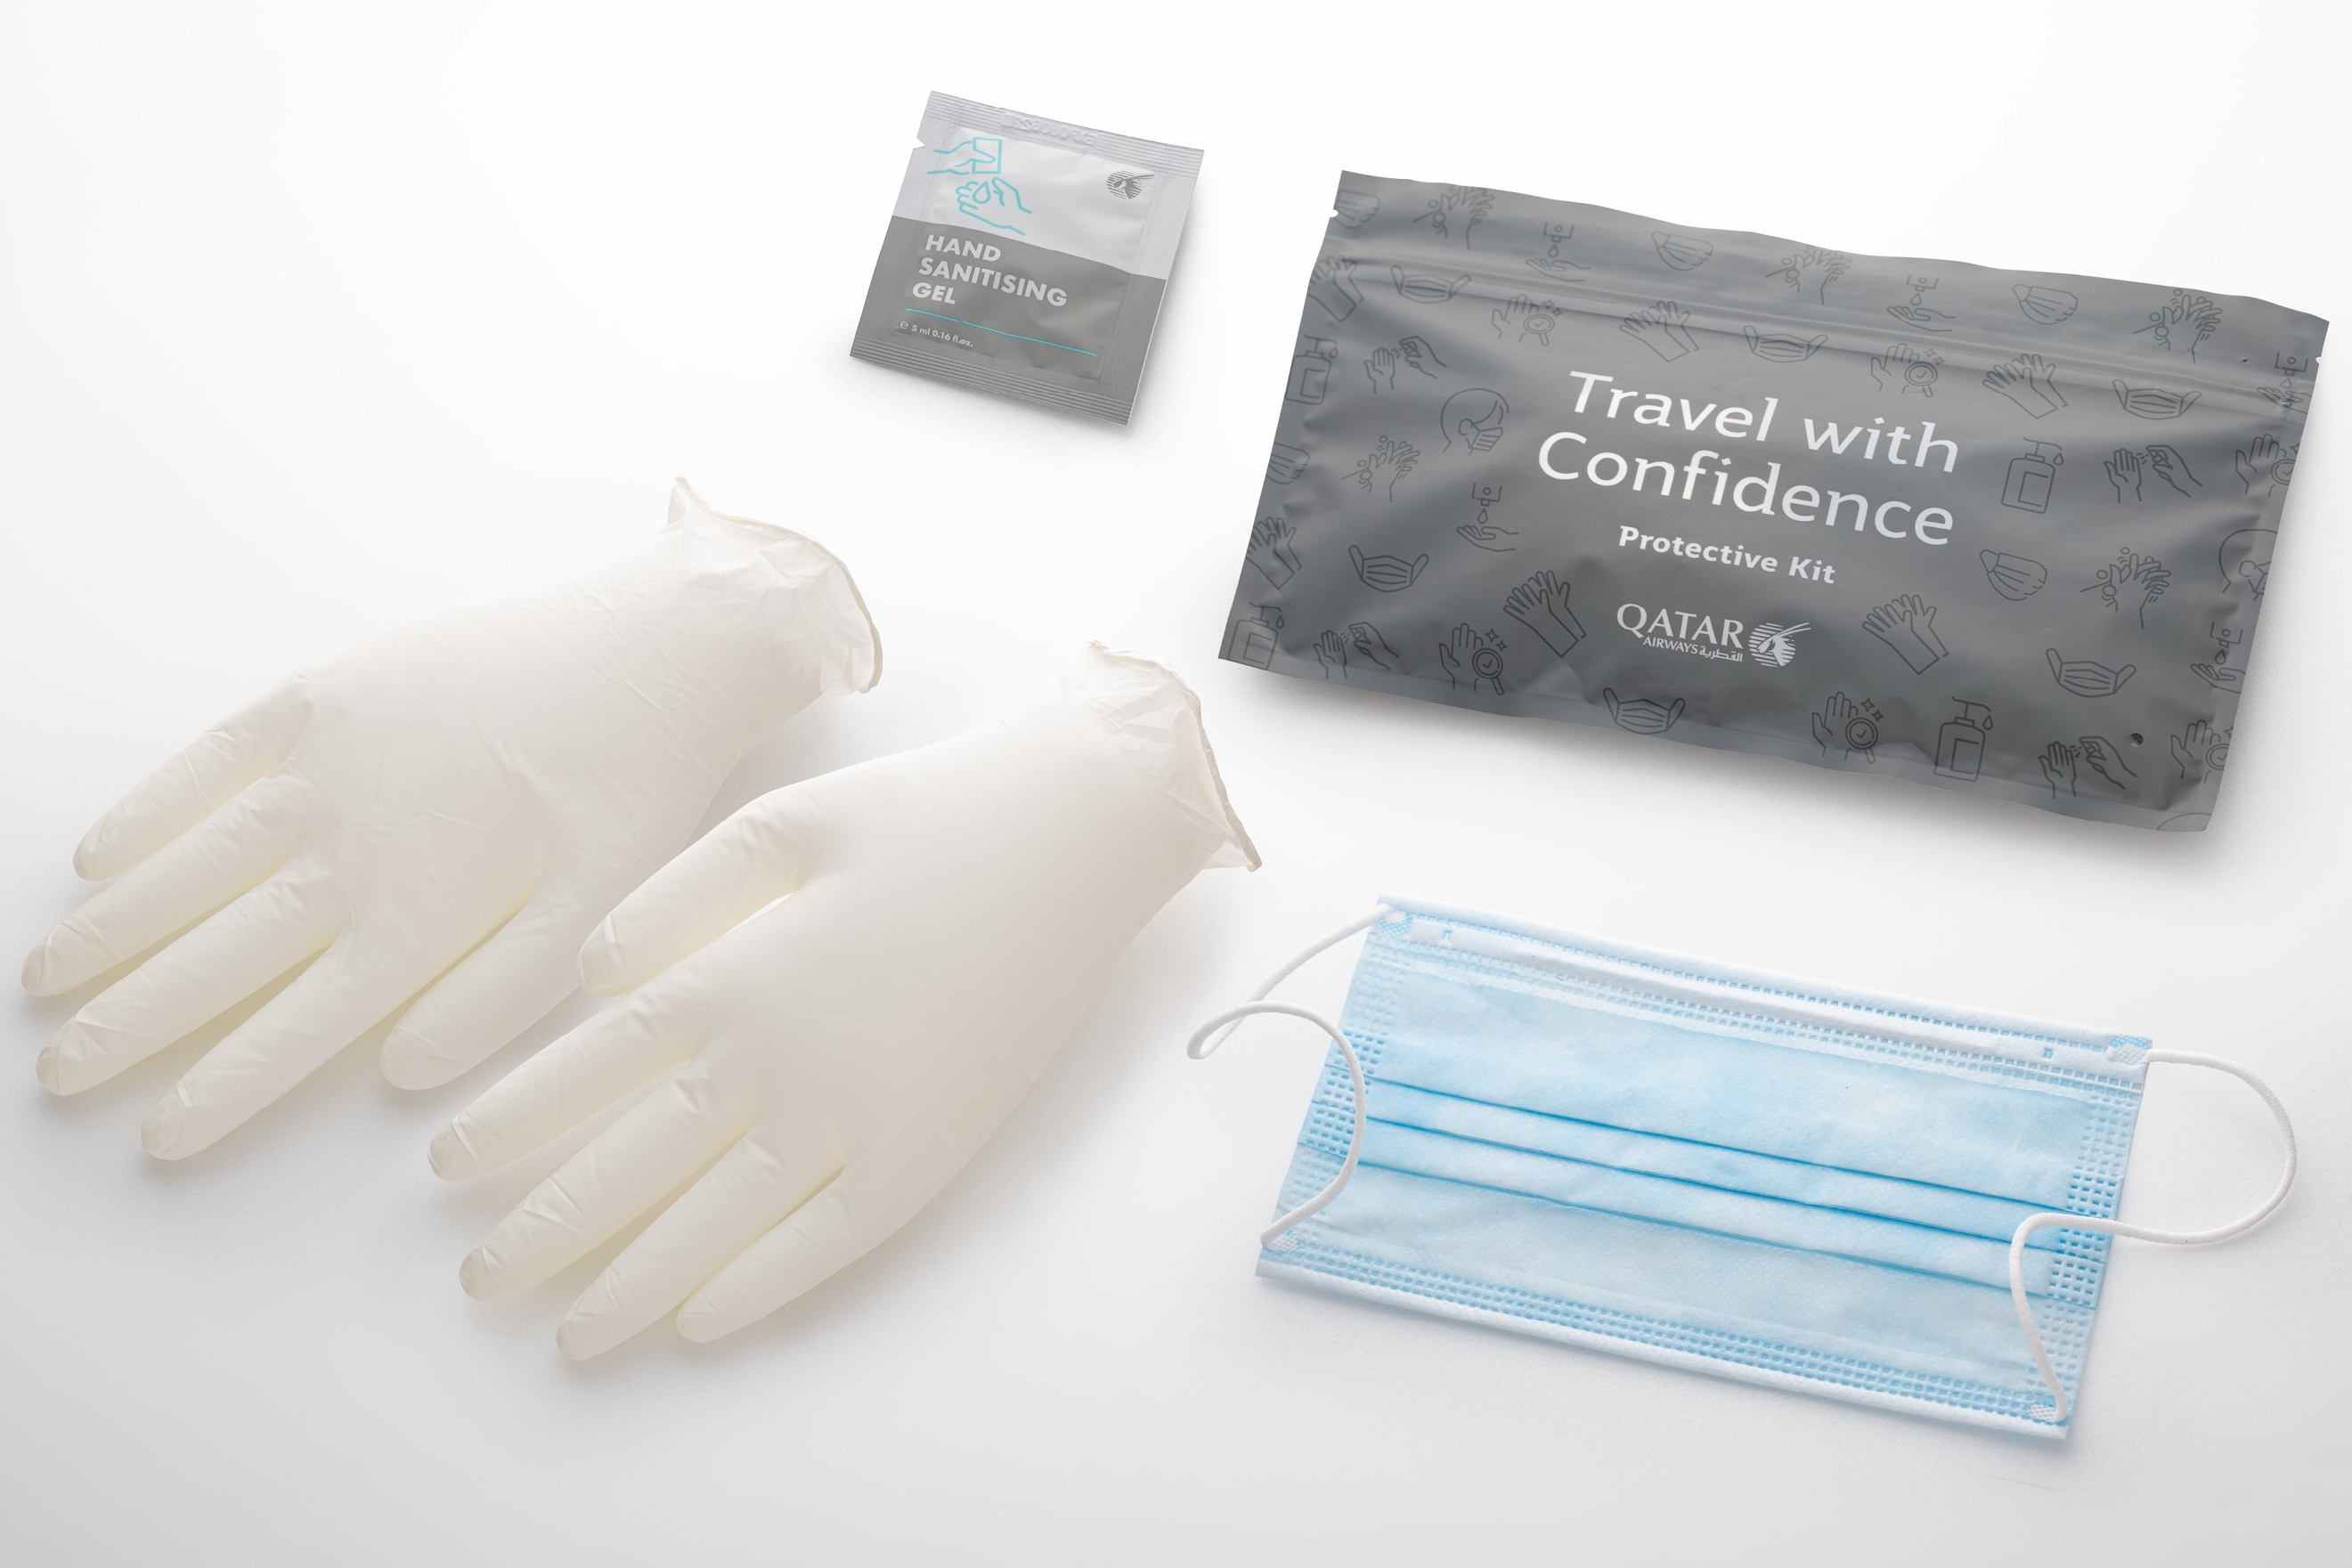 All Qatar Airways passengers are now being provided with a complimentary protective kit. The ziplock pouch contains a single-use surgical face mask, large disposable powder-free gloves and alcohol-based hand sanitiser gel. Business Class customers receive the same protective items but with a larger 75ml sanitiser gel. Click to enlarge.